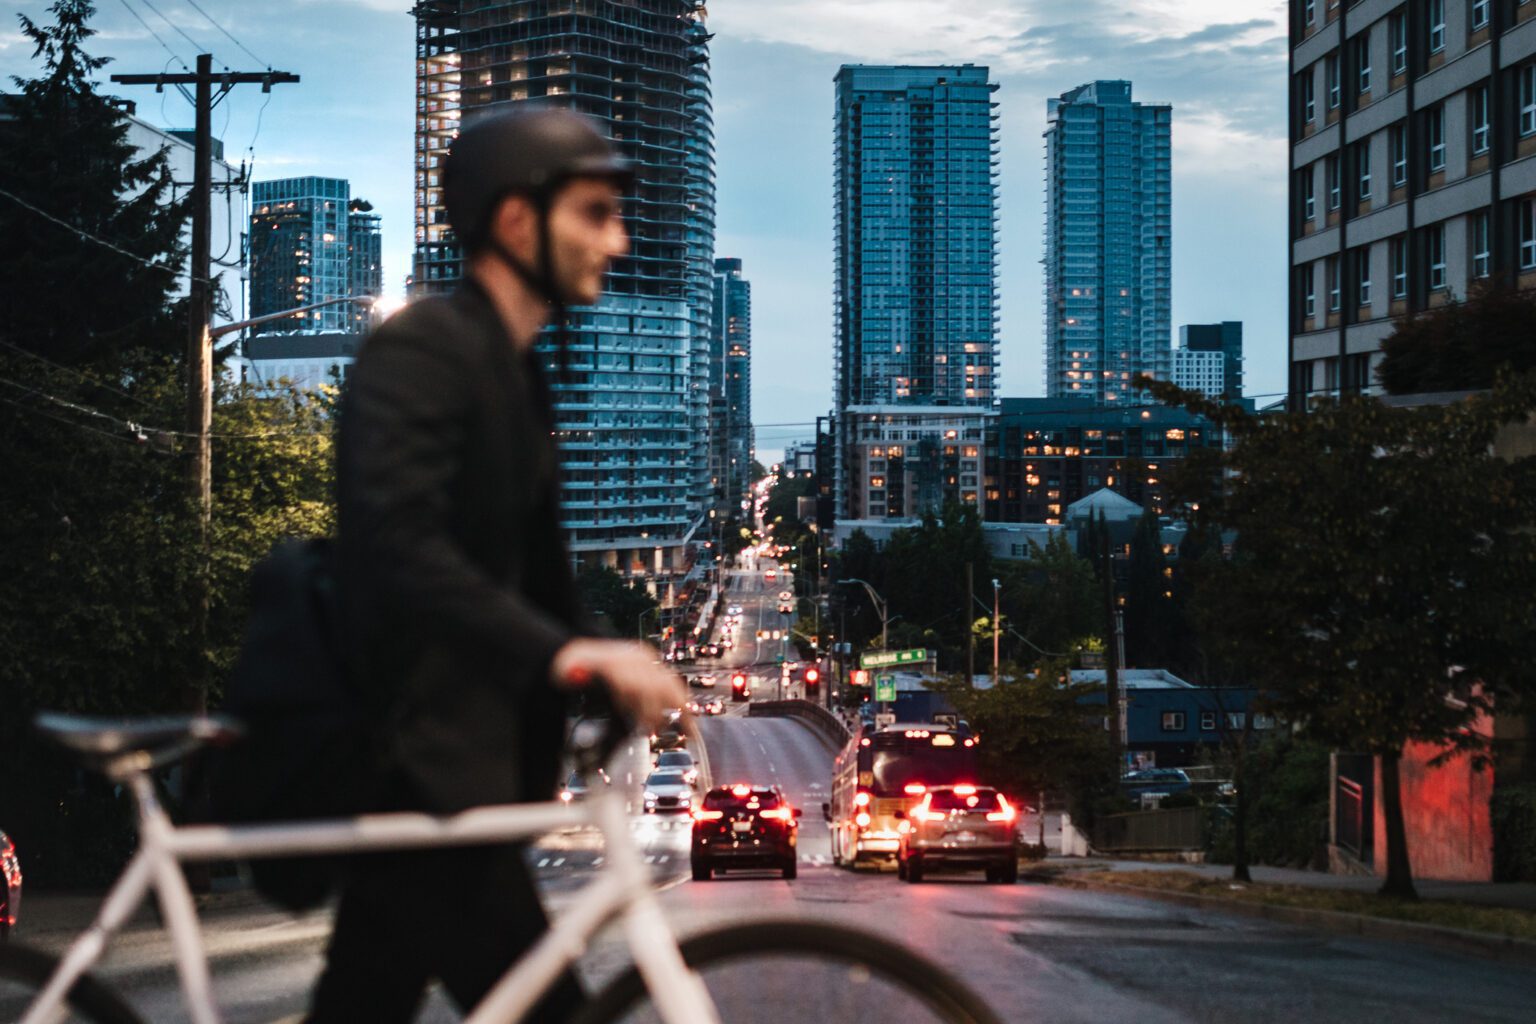 A business man wearing a blazer rides his bicycle through the city streets of Seattle, Washington, USA. He carries work items in a messenger bag slung over his shoulder. An environmentally friendly and healthy way to commute to work: sustainable lifestyle.